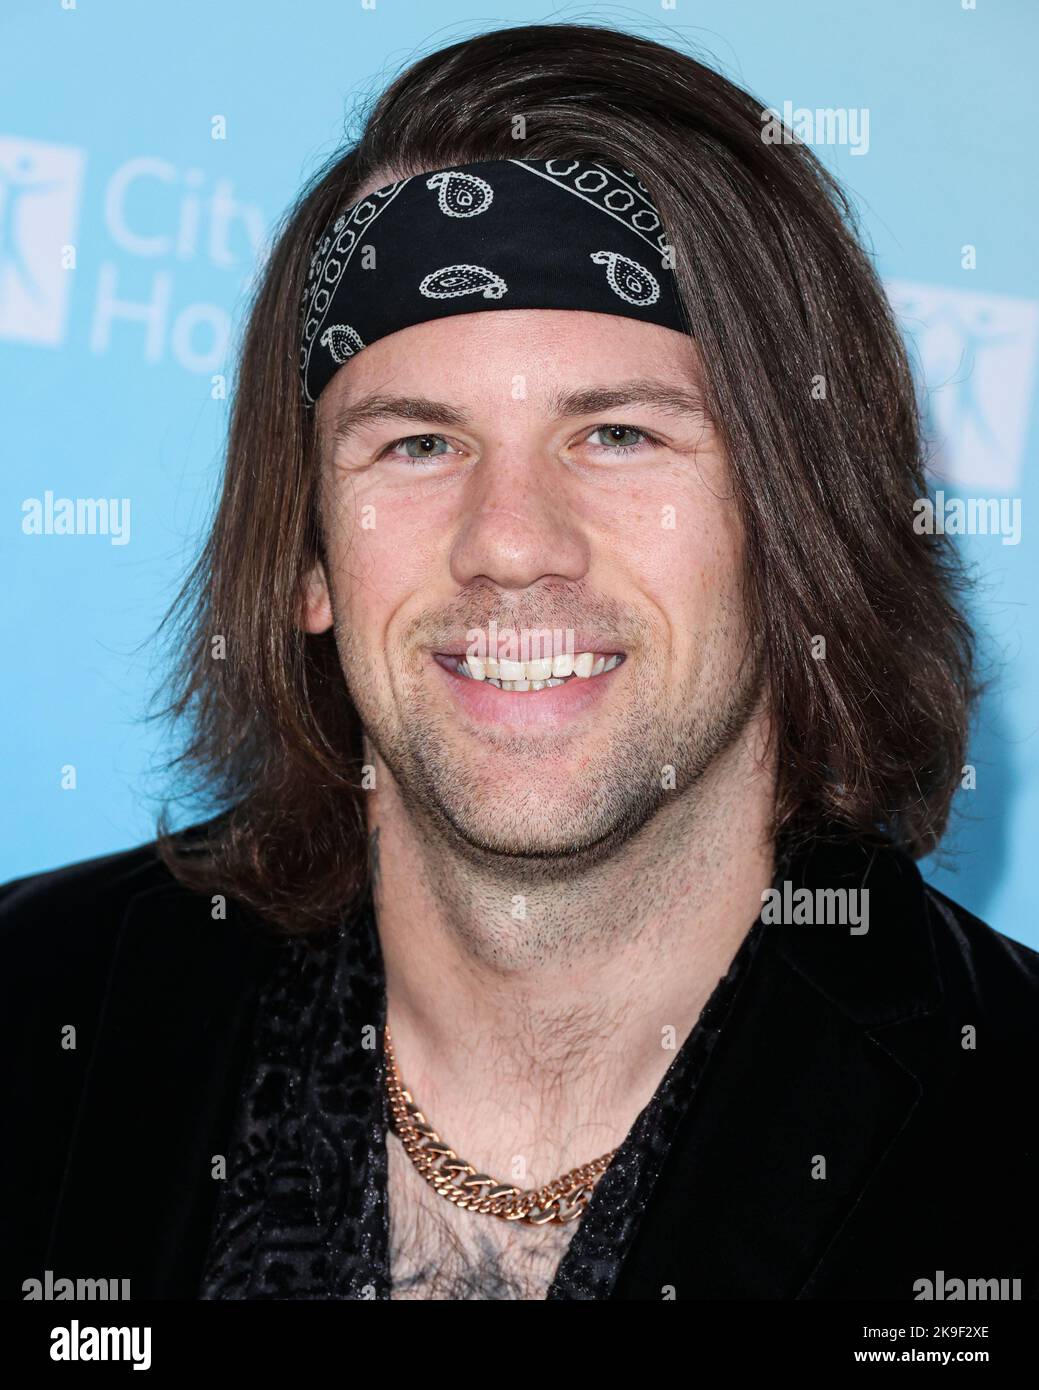 WEST HOLLYWOOD, LOS ANGELES, CALIFORNIA, USA - OCTOBER 27: American singer Caleb Shomo arrives at the City Of Hope's 2022 Spirit Of Life Gala held at the Pacific Design Center on October 27, 2022 in West Hollywood, Los Angeles, California, United States. (Photo by Xavier Collin/Image Press Agency) Stock Photo